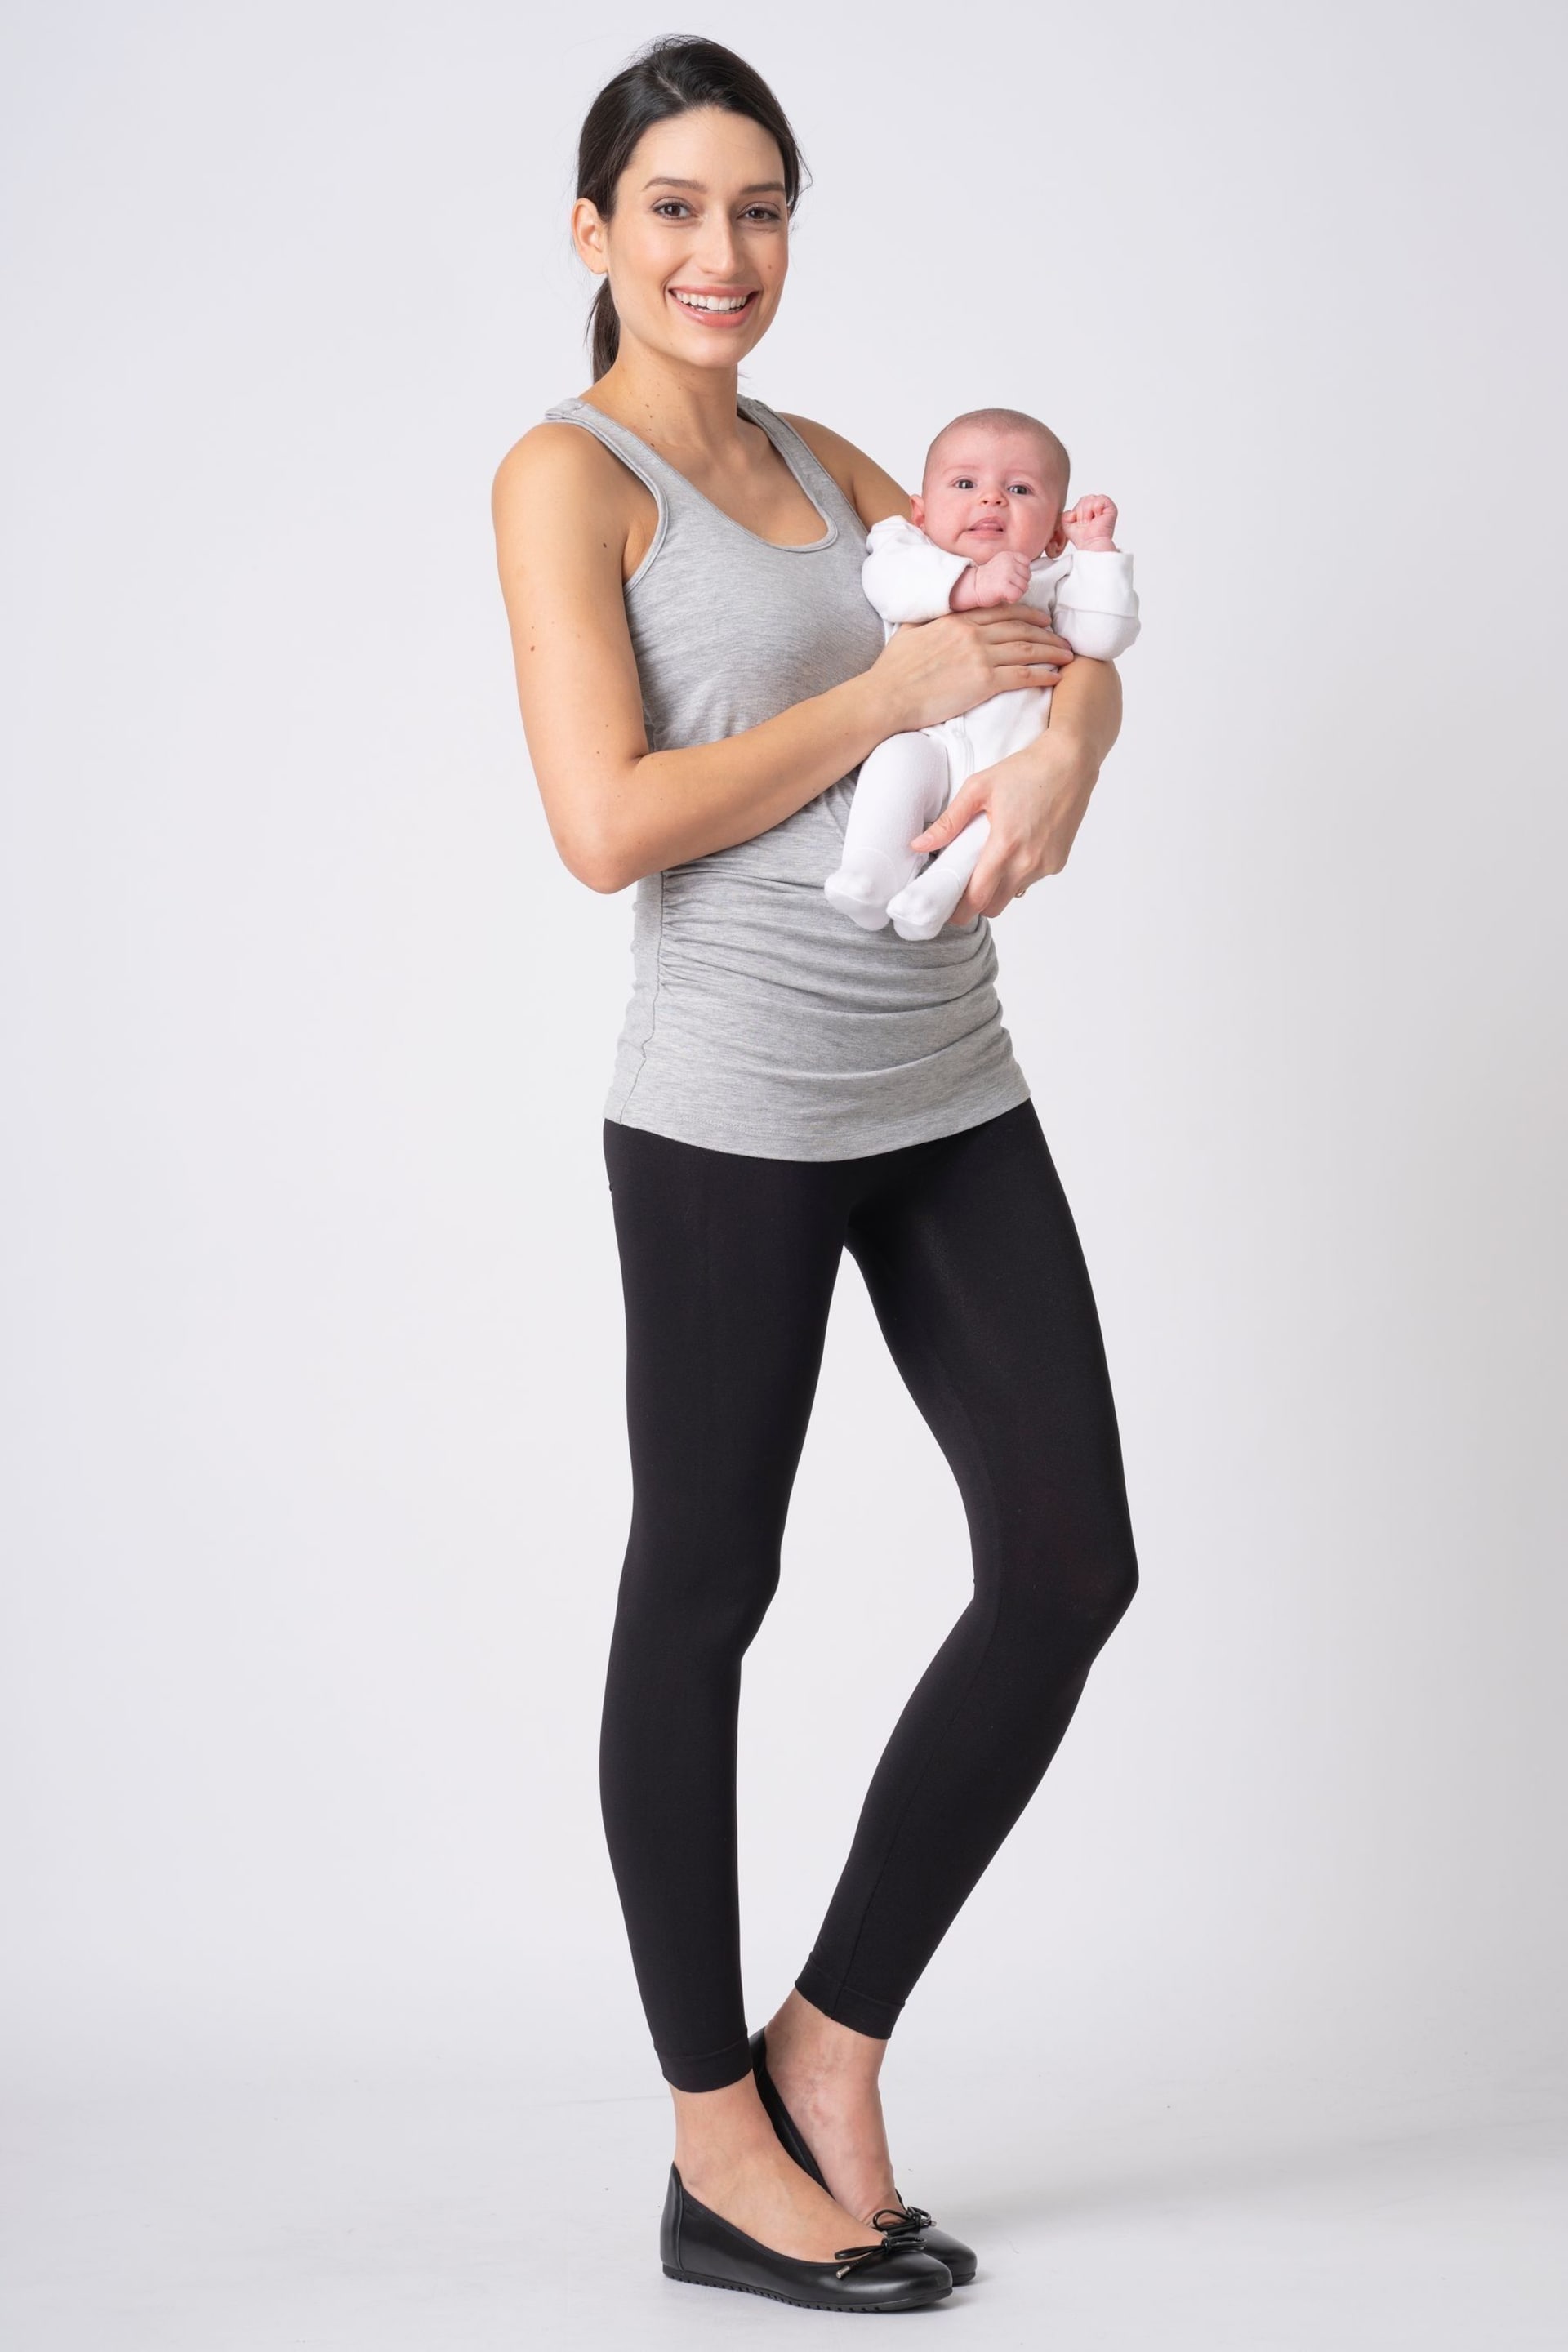 Seraphine Blue Maternity And Nursing Tops – Twin Pack - Image 4 of 12